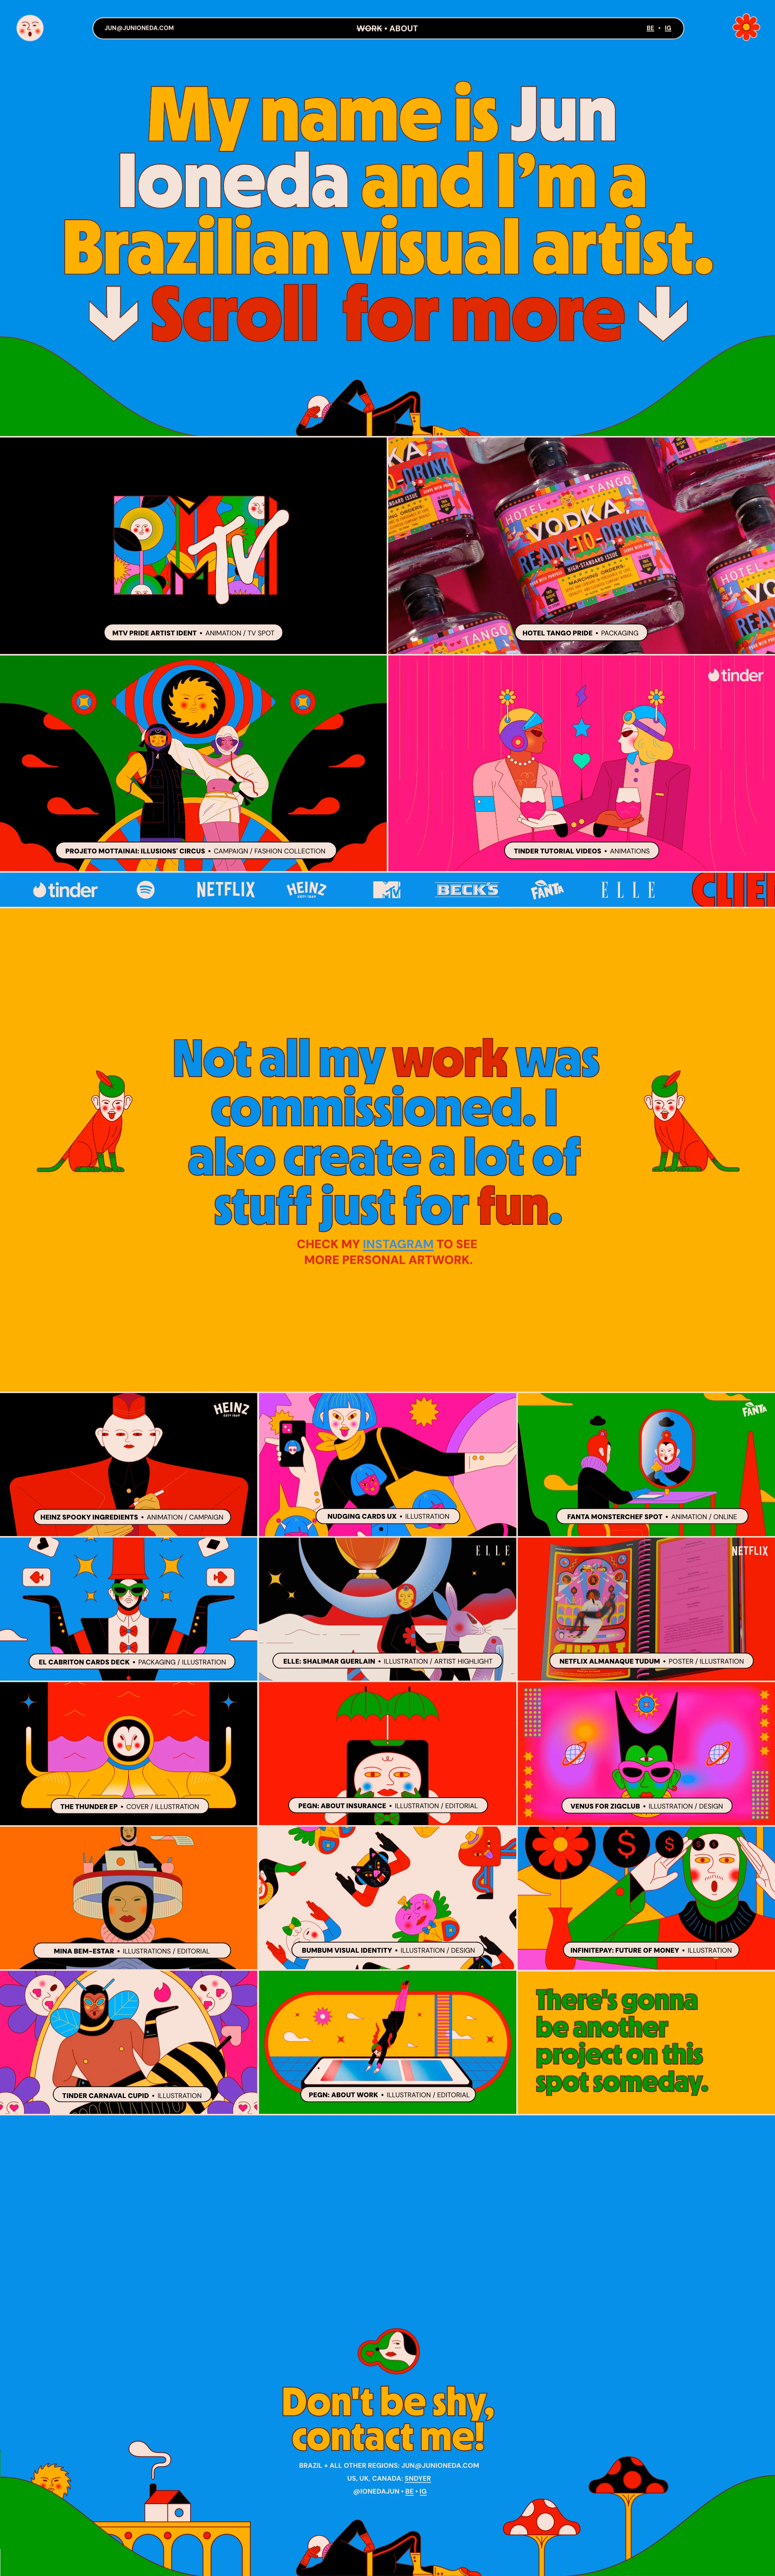 Jun Ioneda Landing Page Example: I’m a graphic artist from São Paulo, Brazil. I’ve been leading illustration projects both as a solo multidisciplinary artist and as head of my own illustration studio, Barca.